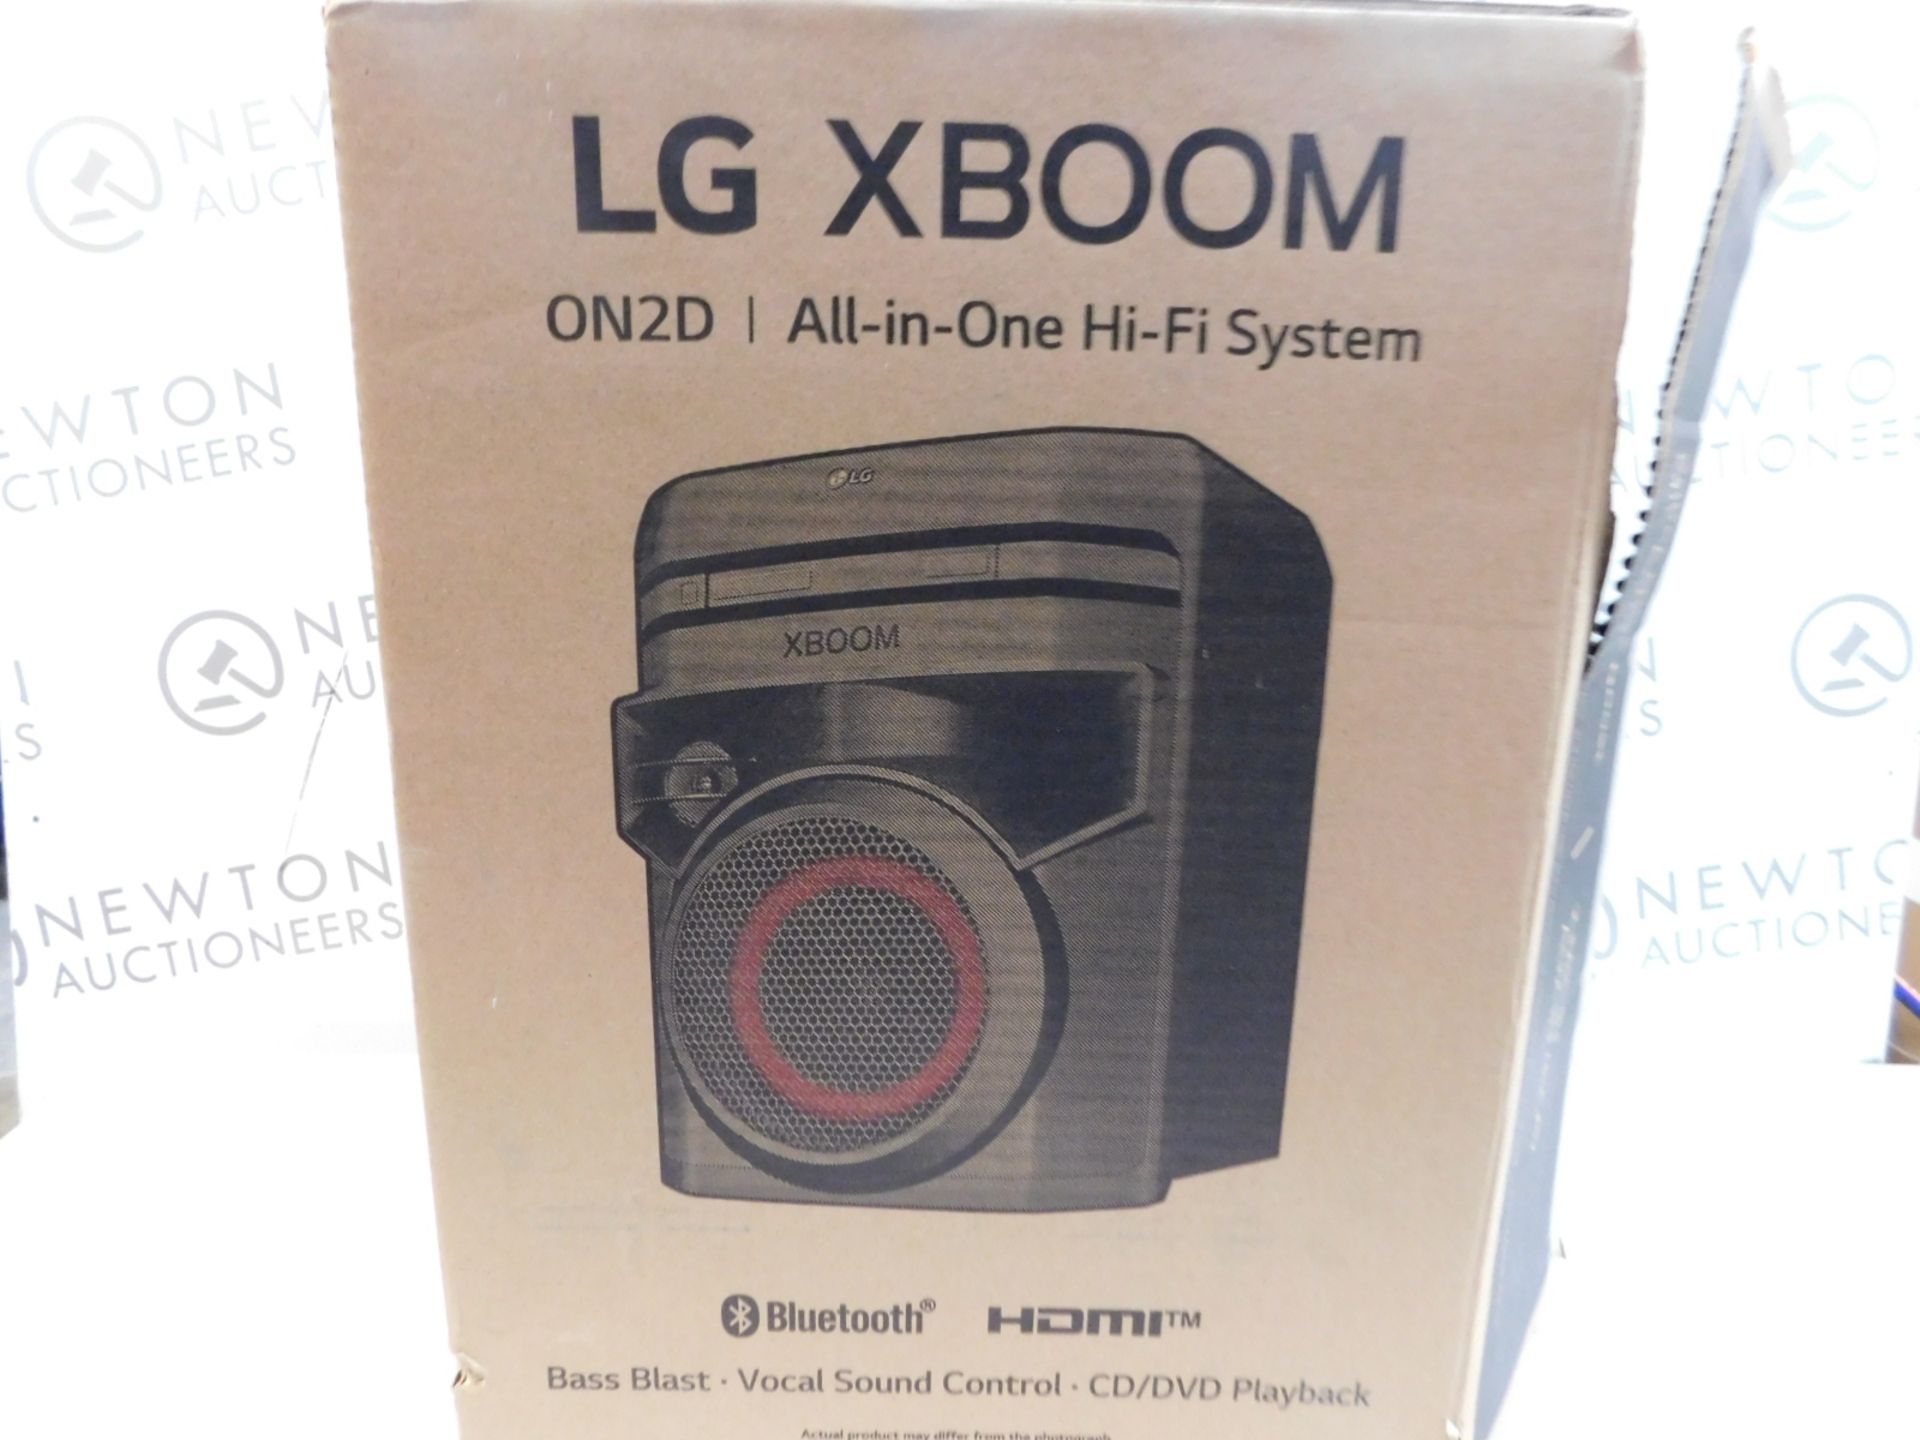 1 BOXED LG XBOOM ON2D BLUETOOTH MEGASOUND PARTY SPEAKER RRP Â£199